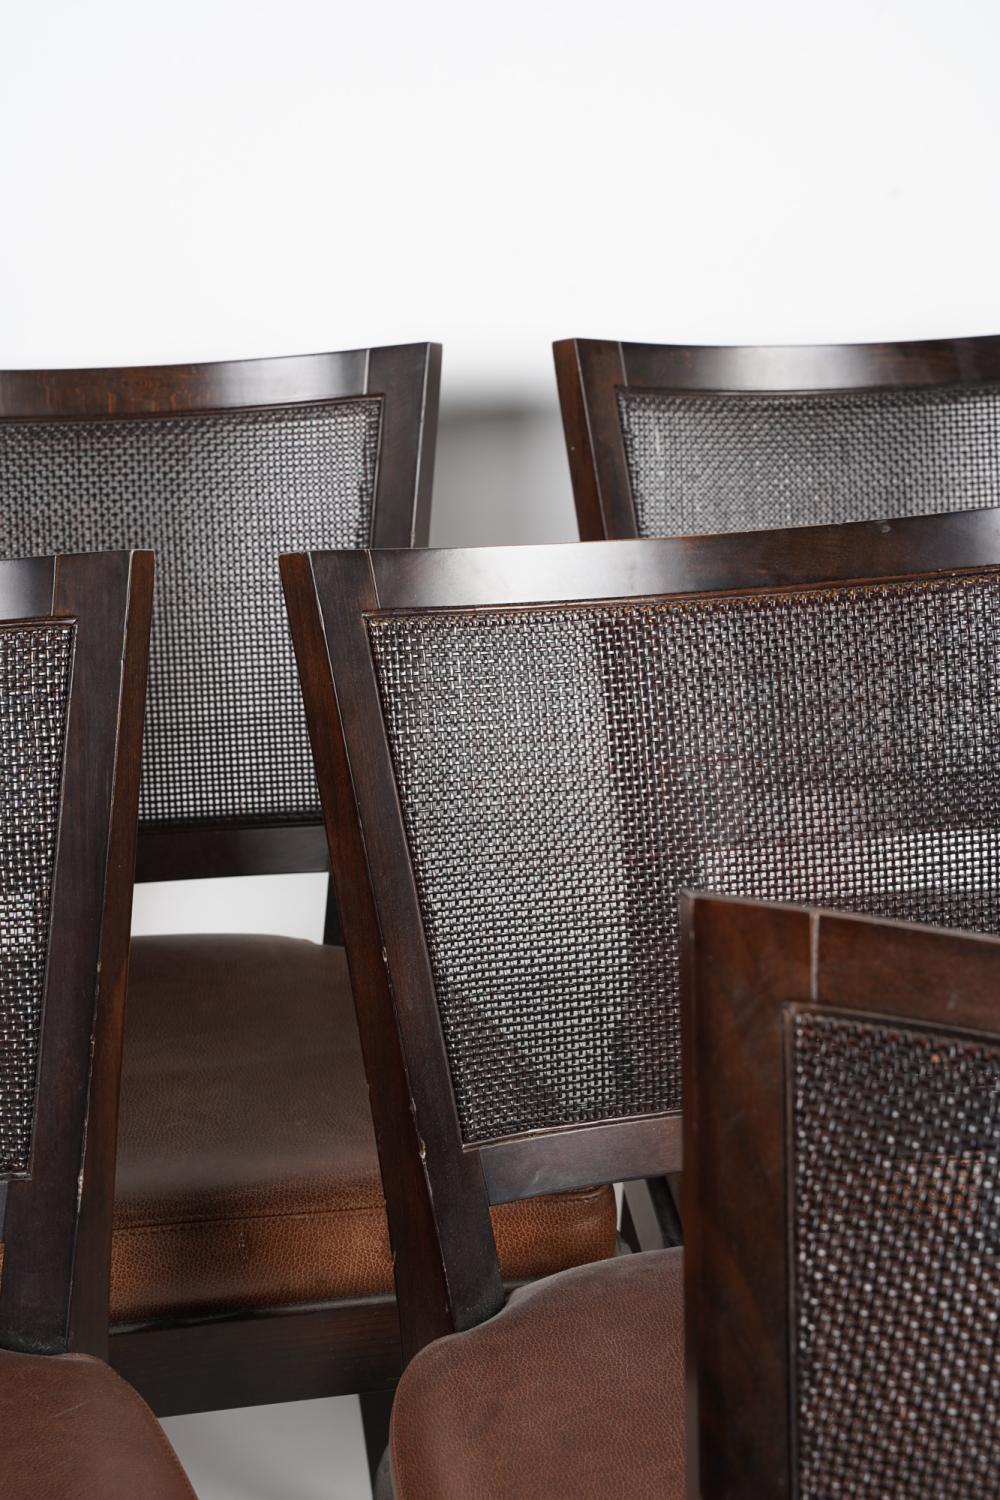 italien Set Six Promemoria Caffe Caned Leather Dining Chairs Contemporary Italian C 2000 en vente